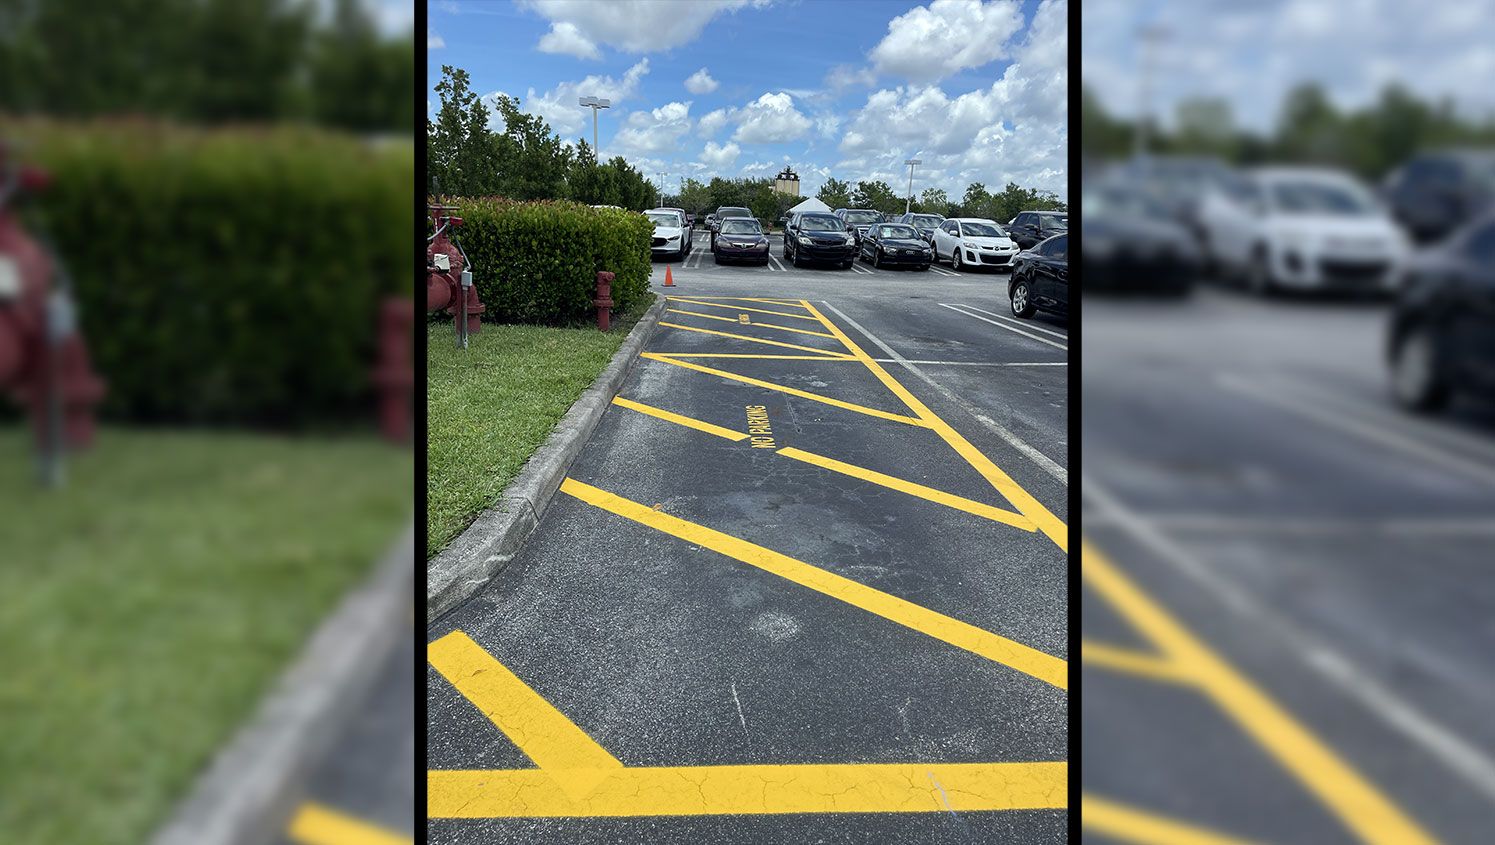 striping for “no parking” zone